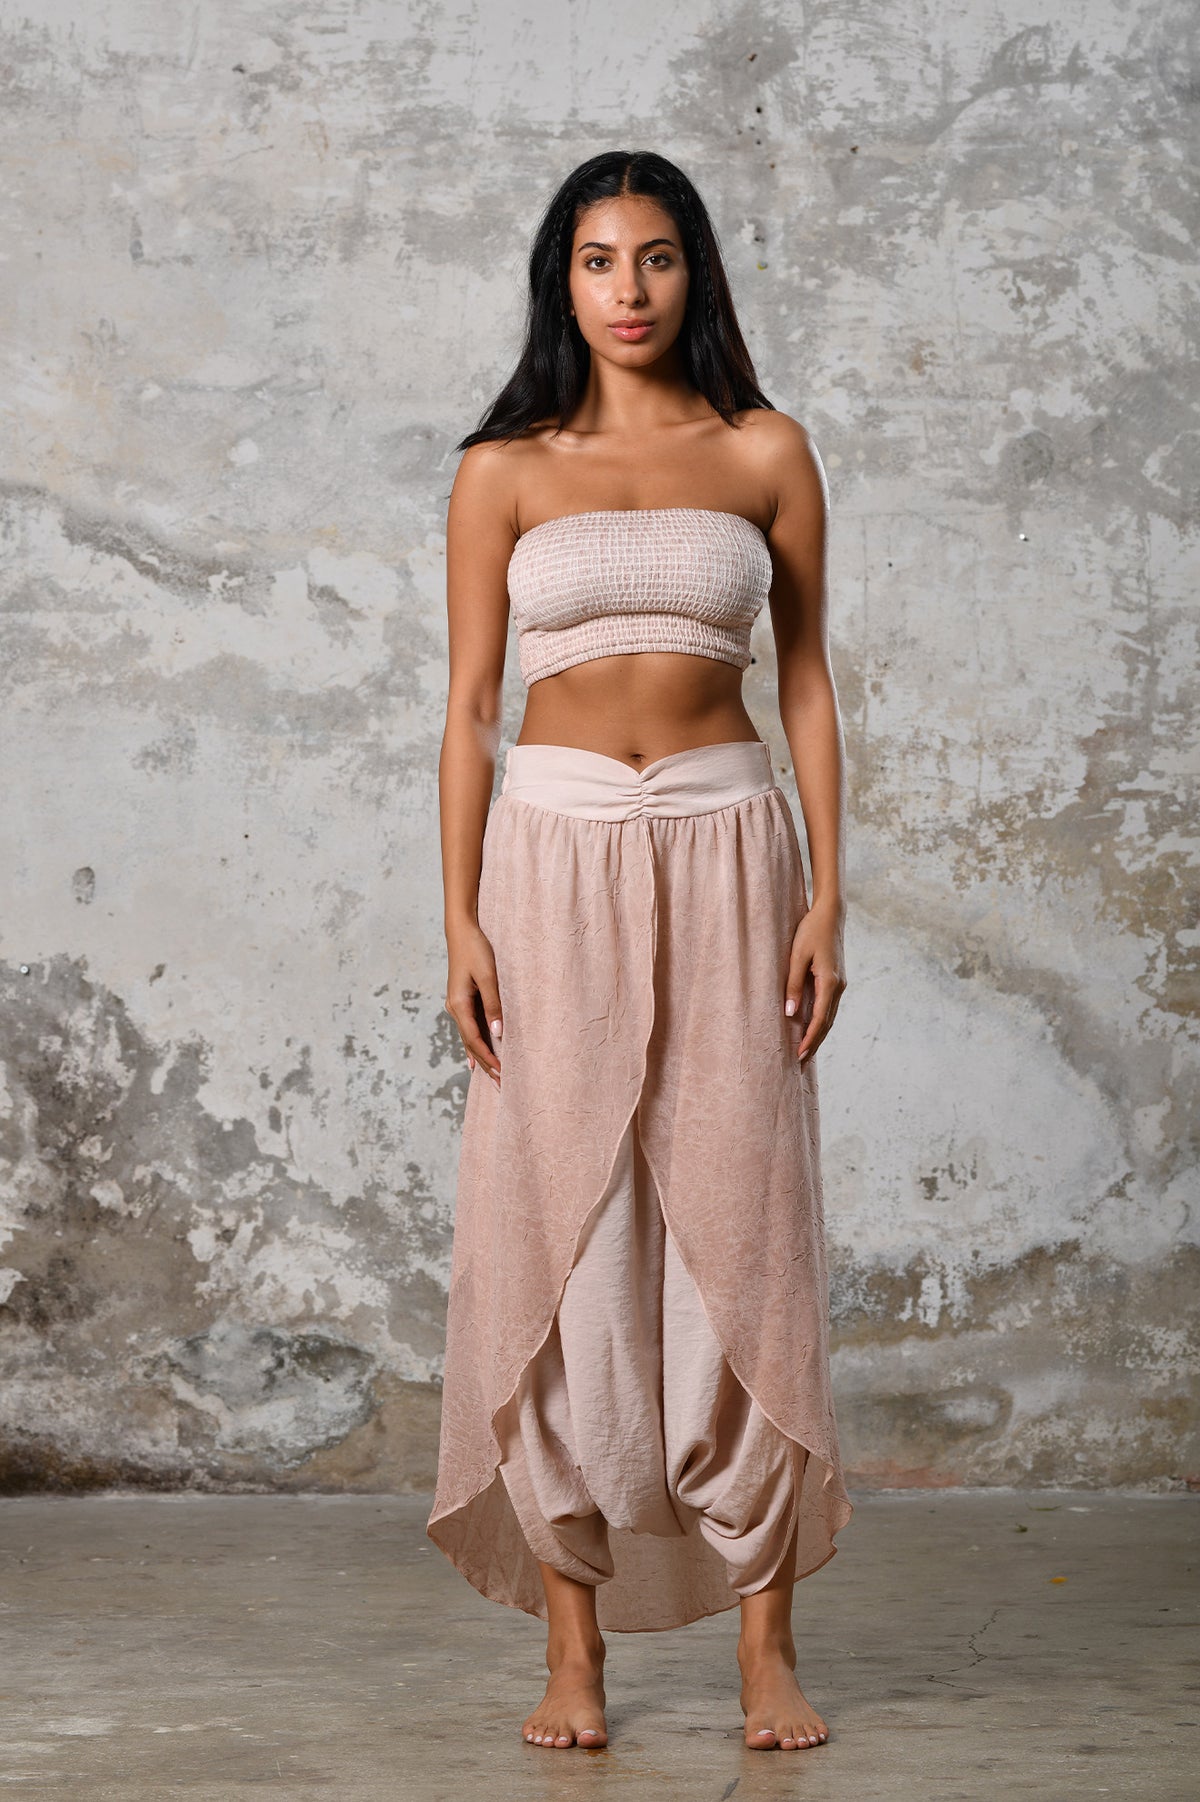 Step into timeless boho chic with our Powder Pink Boho high split skirt trousers. Crafted from organic materials, this sexy summer boho yoga pants , eco-conscious fashion for the modern goddess.